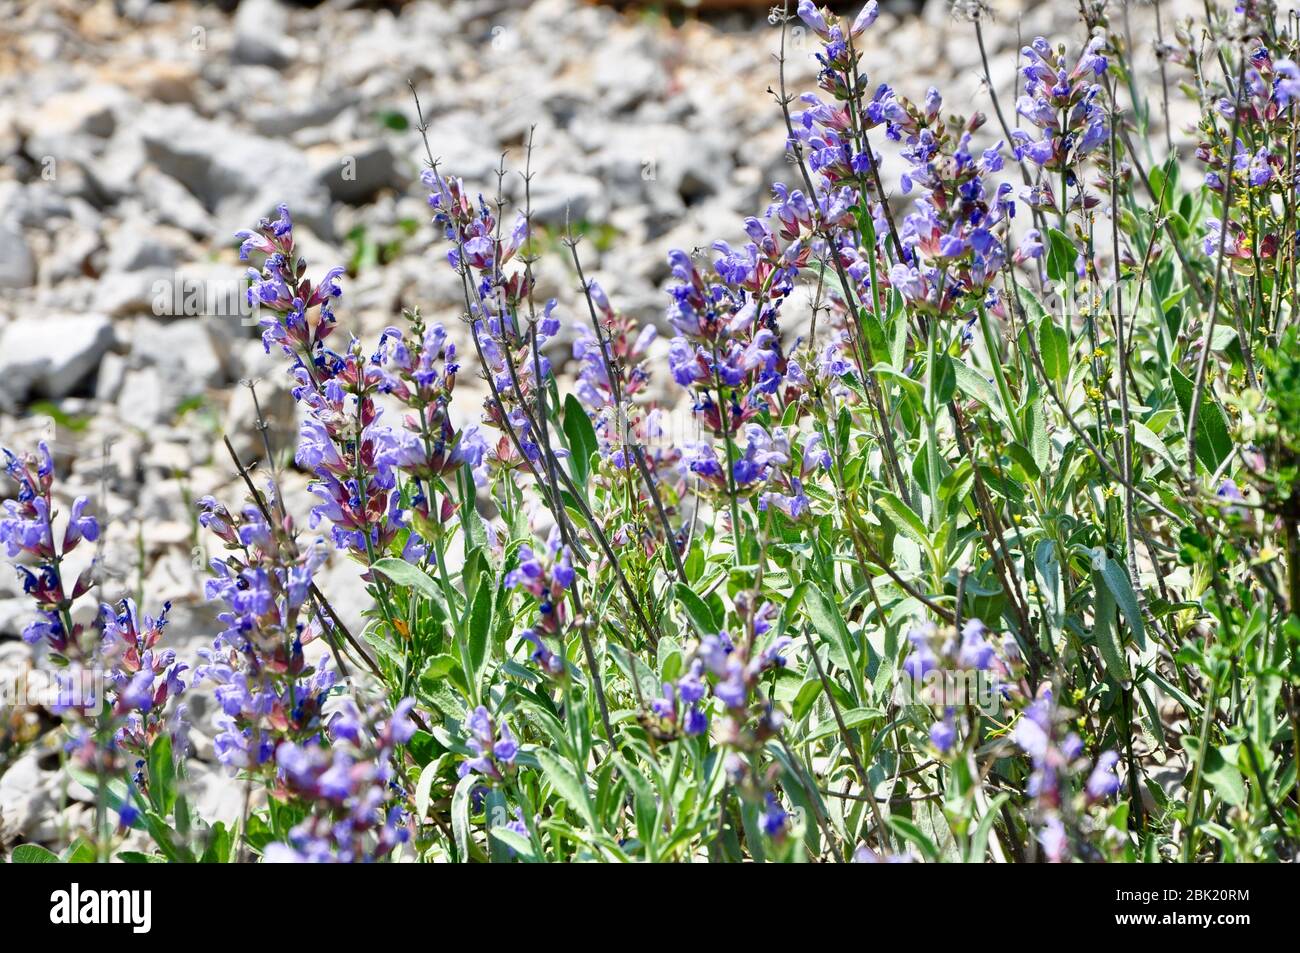 Salvia plant in blooming time with aromatic leves in the field. Blooming sage on the Croatian slopes. Stock Photo